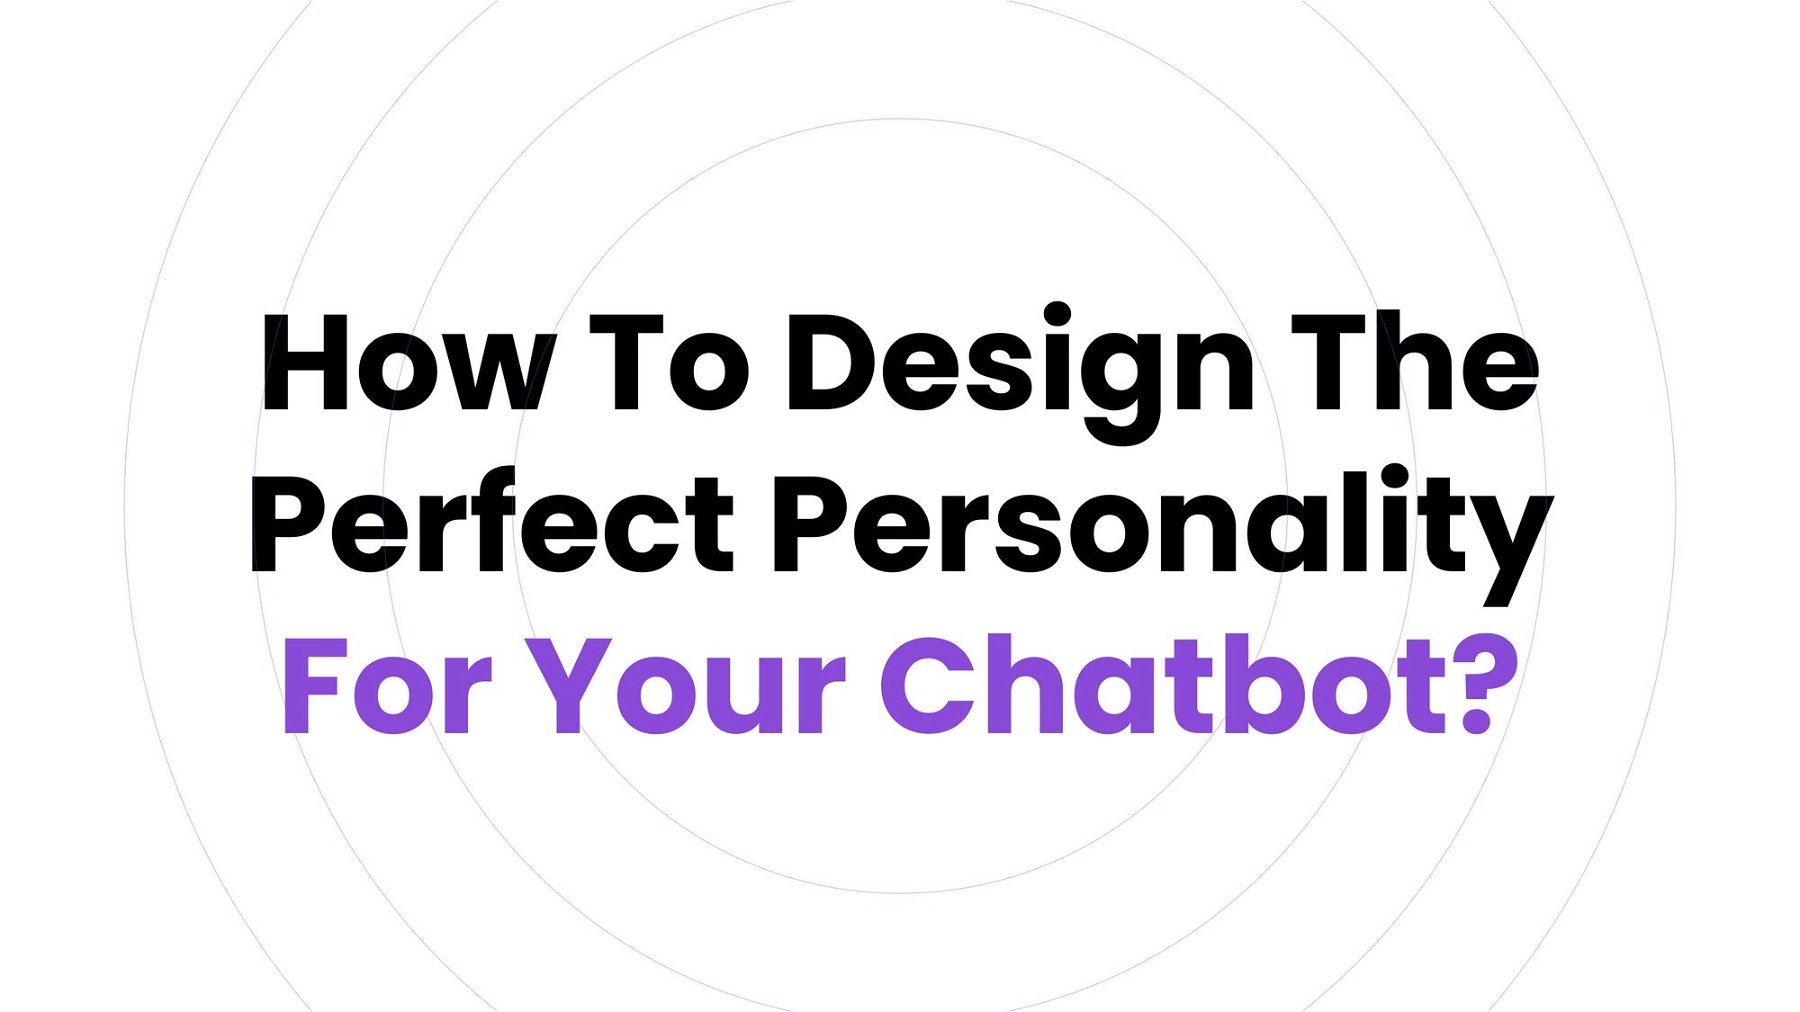 Design A Winning Chatbot Personality For Your Business!